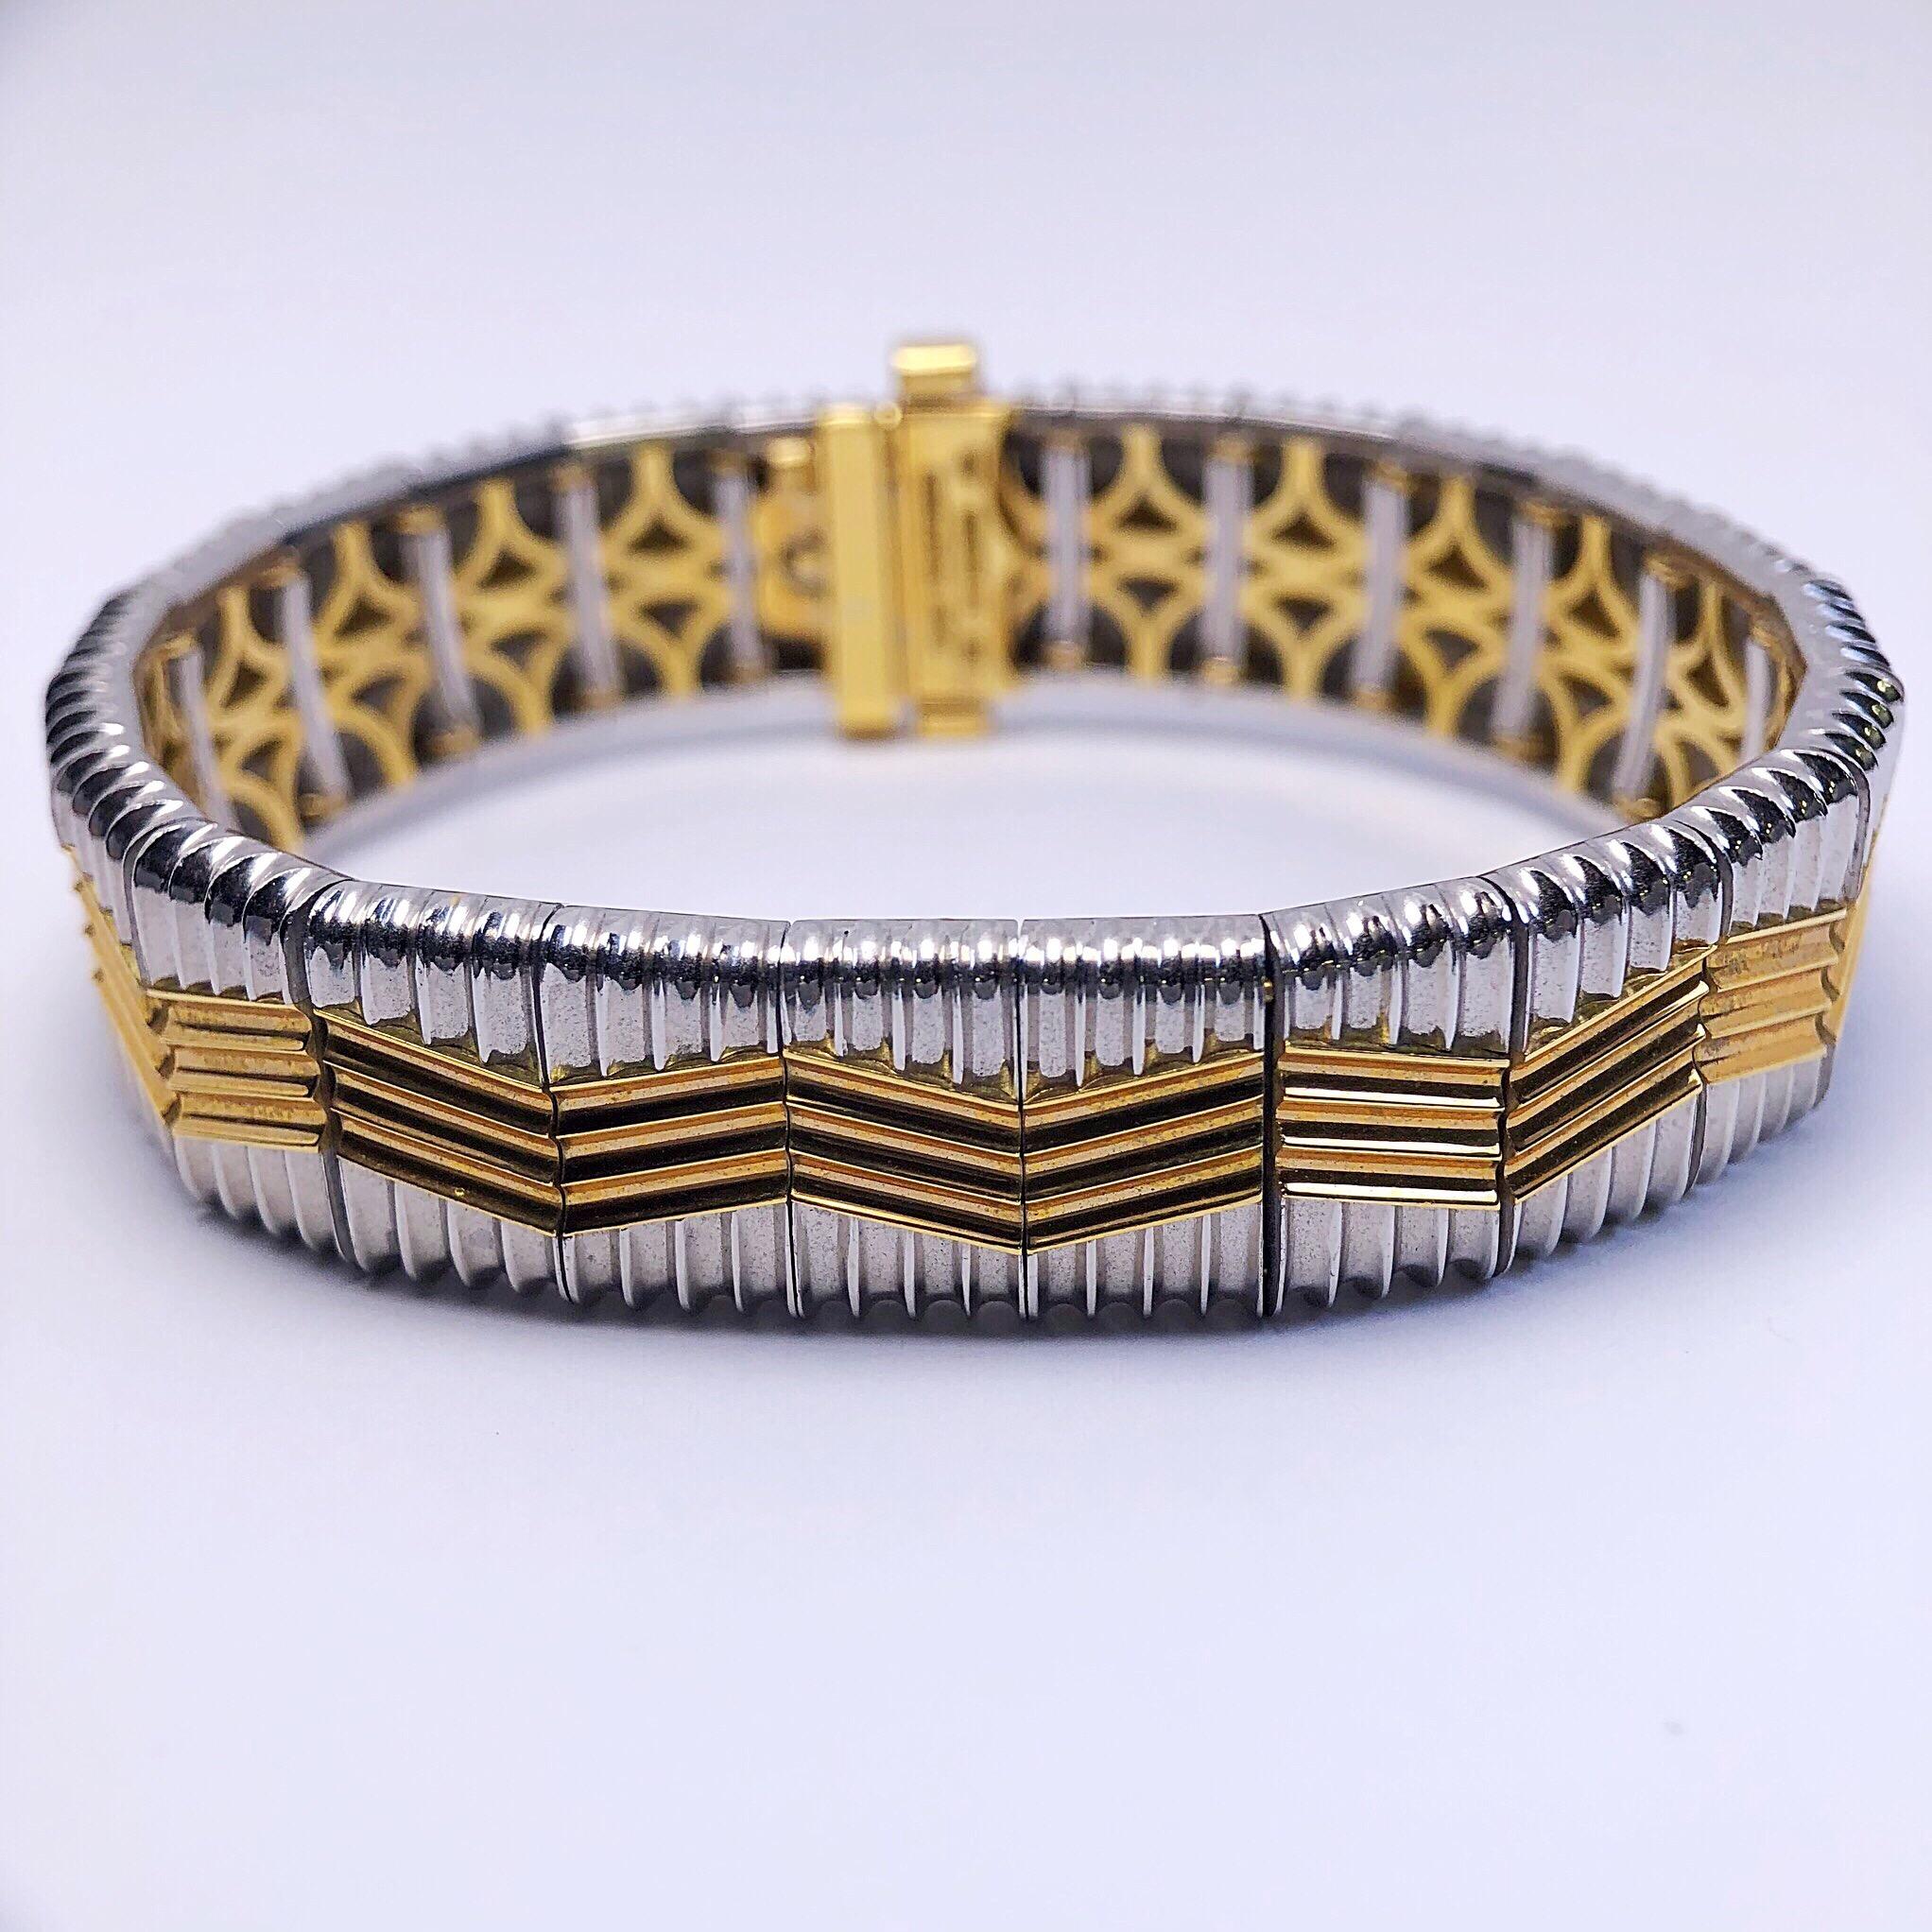 This 18kt and Platinum bracelet is an iconic representation of the artist, Michael Bondanza, world renowned work in precious metals. Each Michael Bondanza piece is expertly hand crafted in the heart of New York City. 24 hand made links comprised of